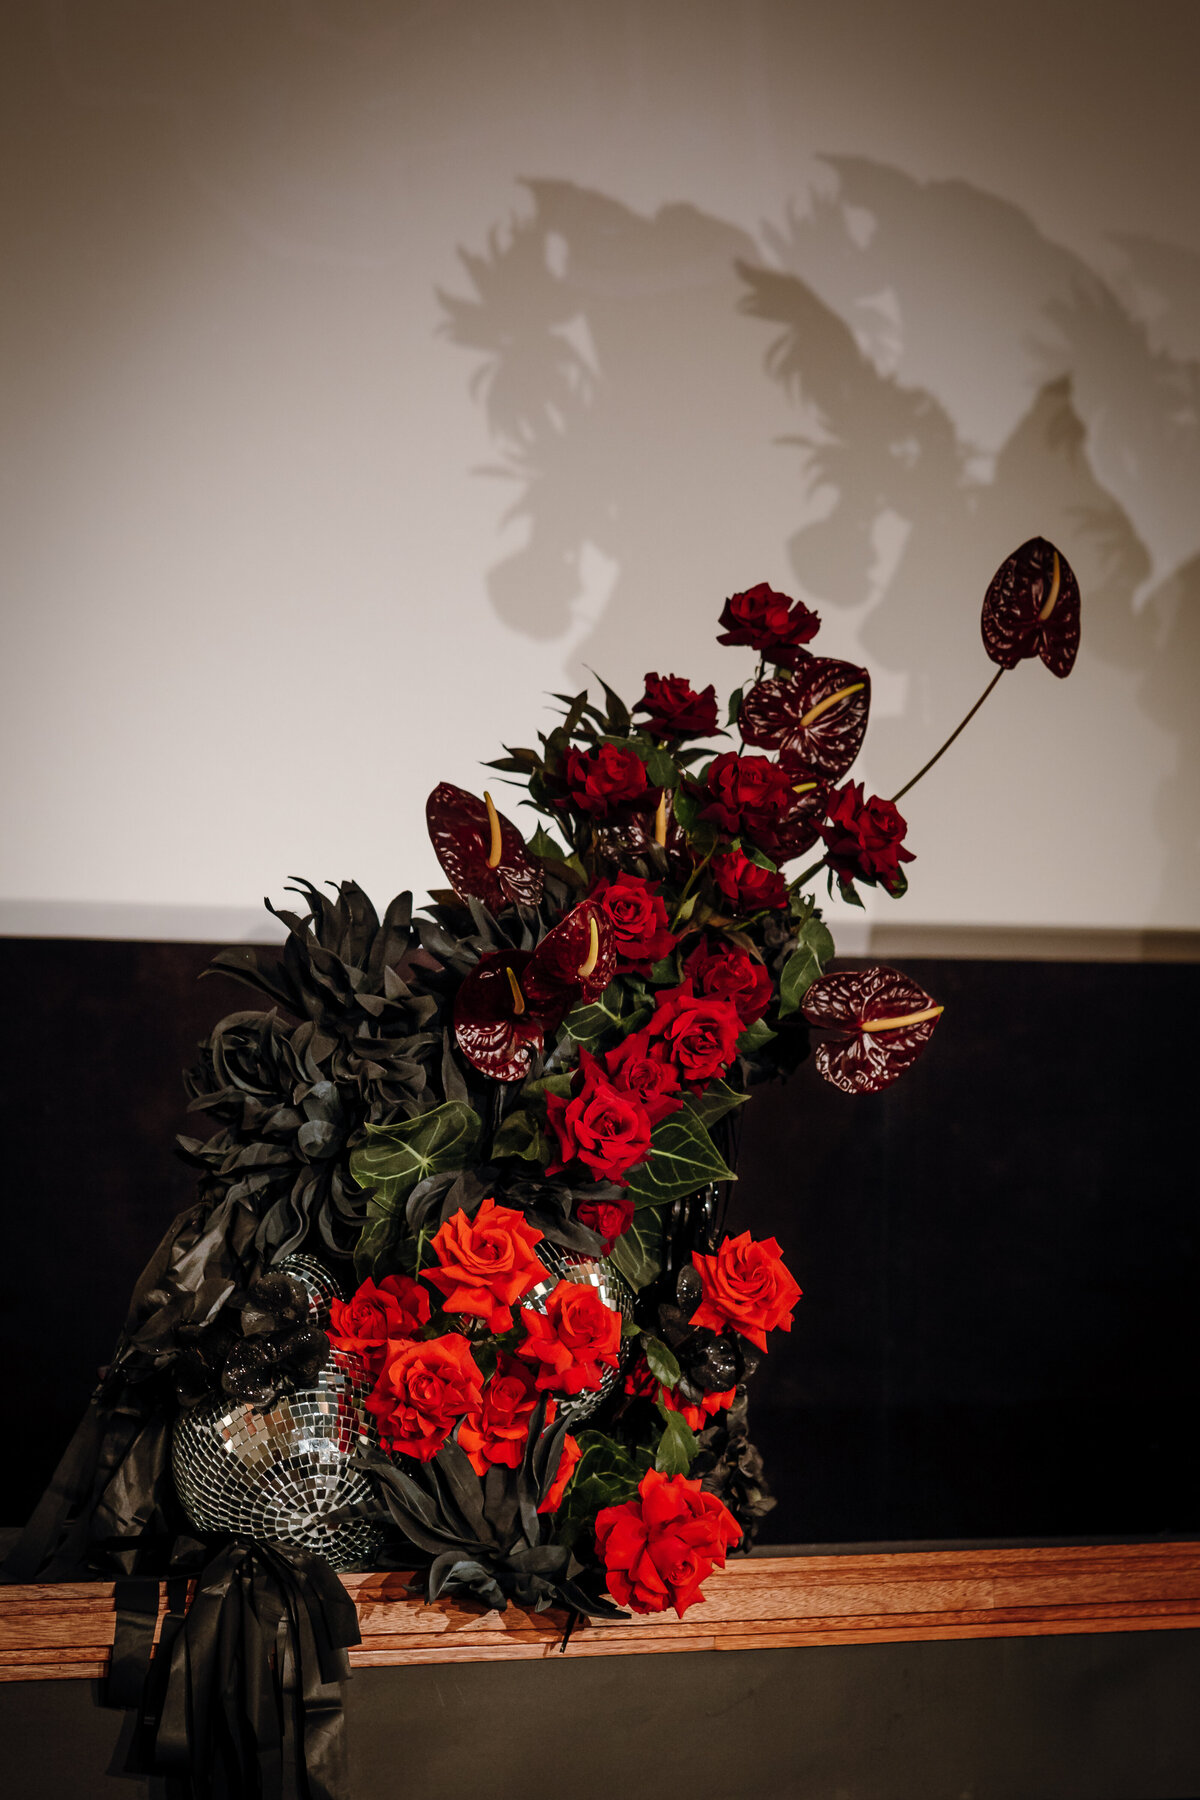 Close up shot of the red floral arrangement on stage.